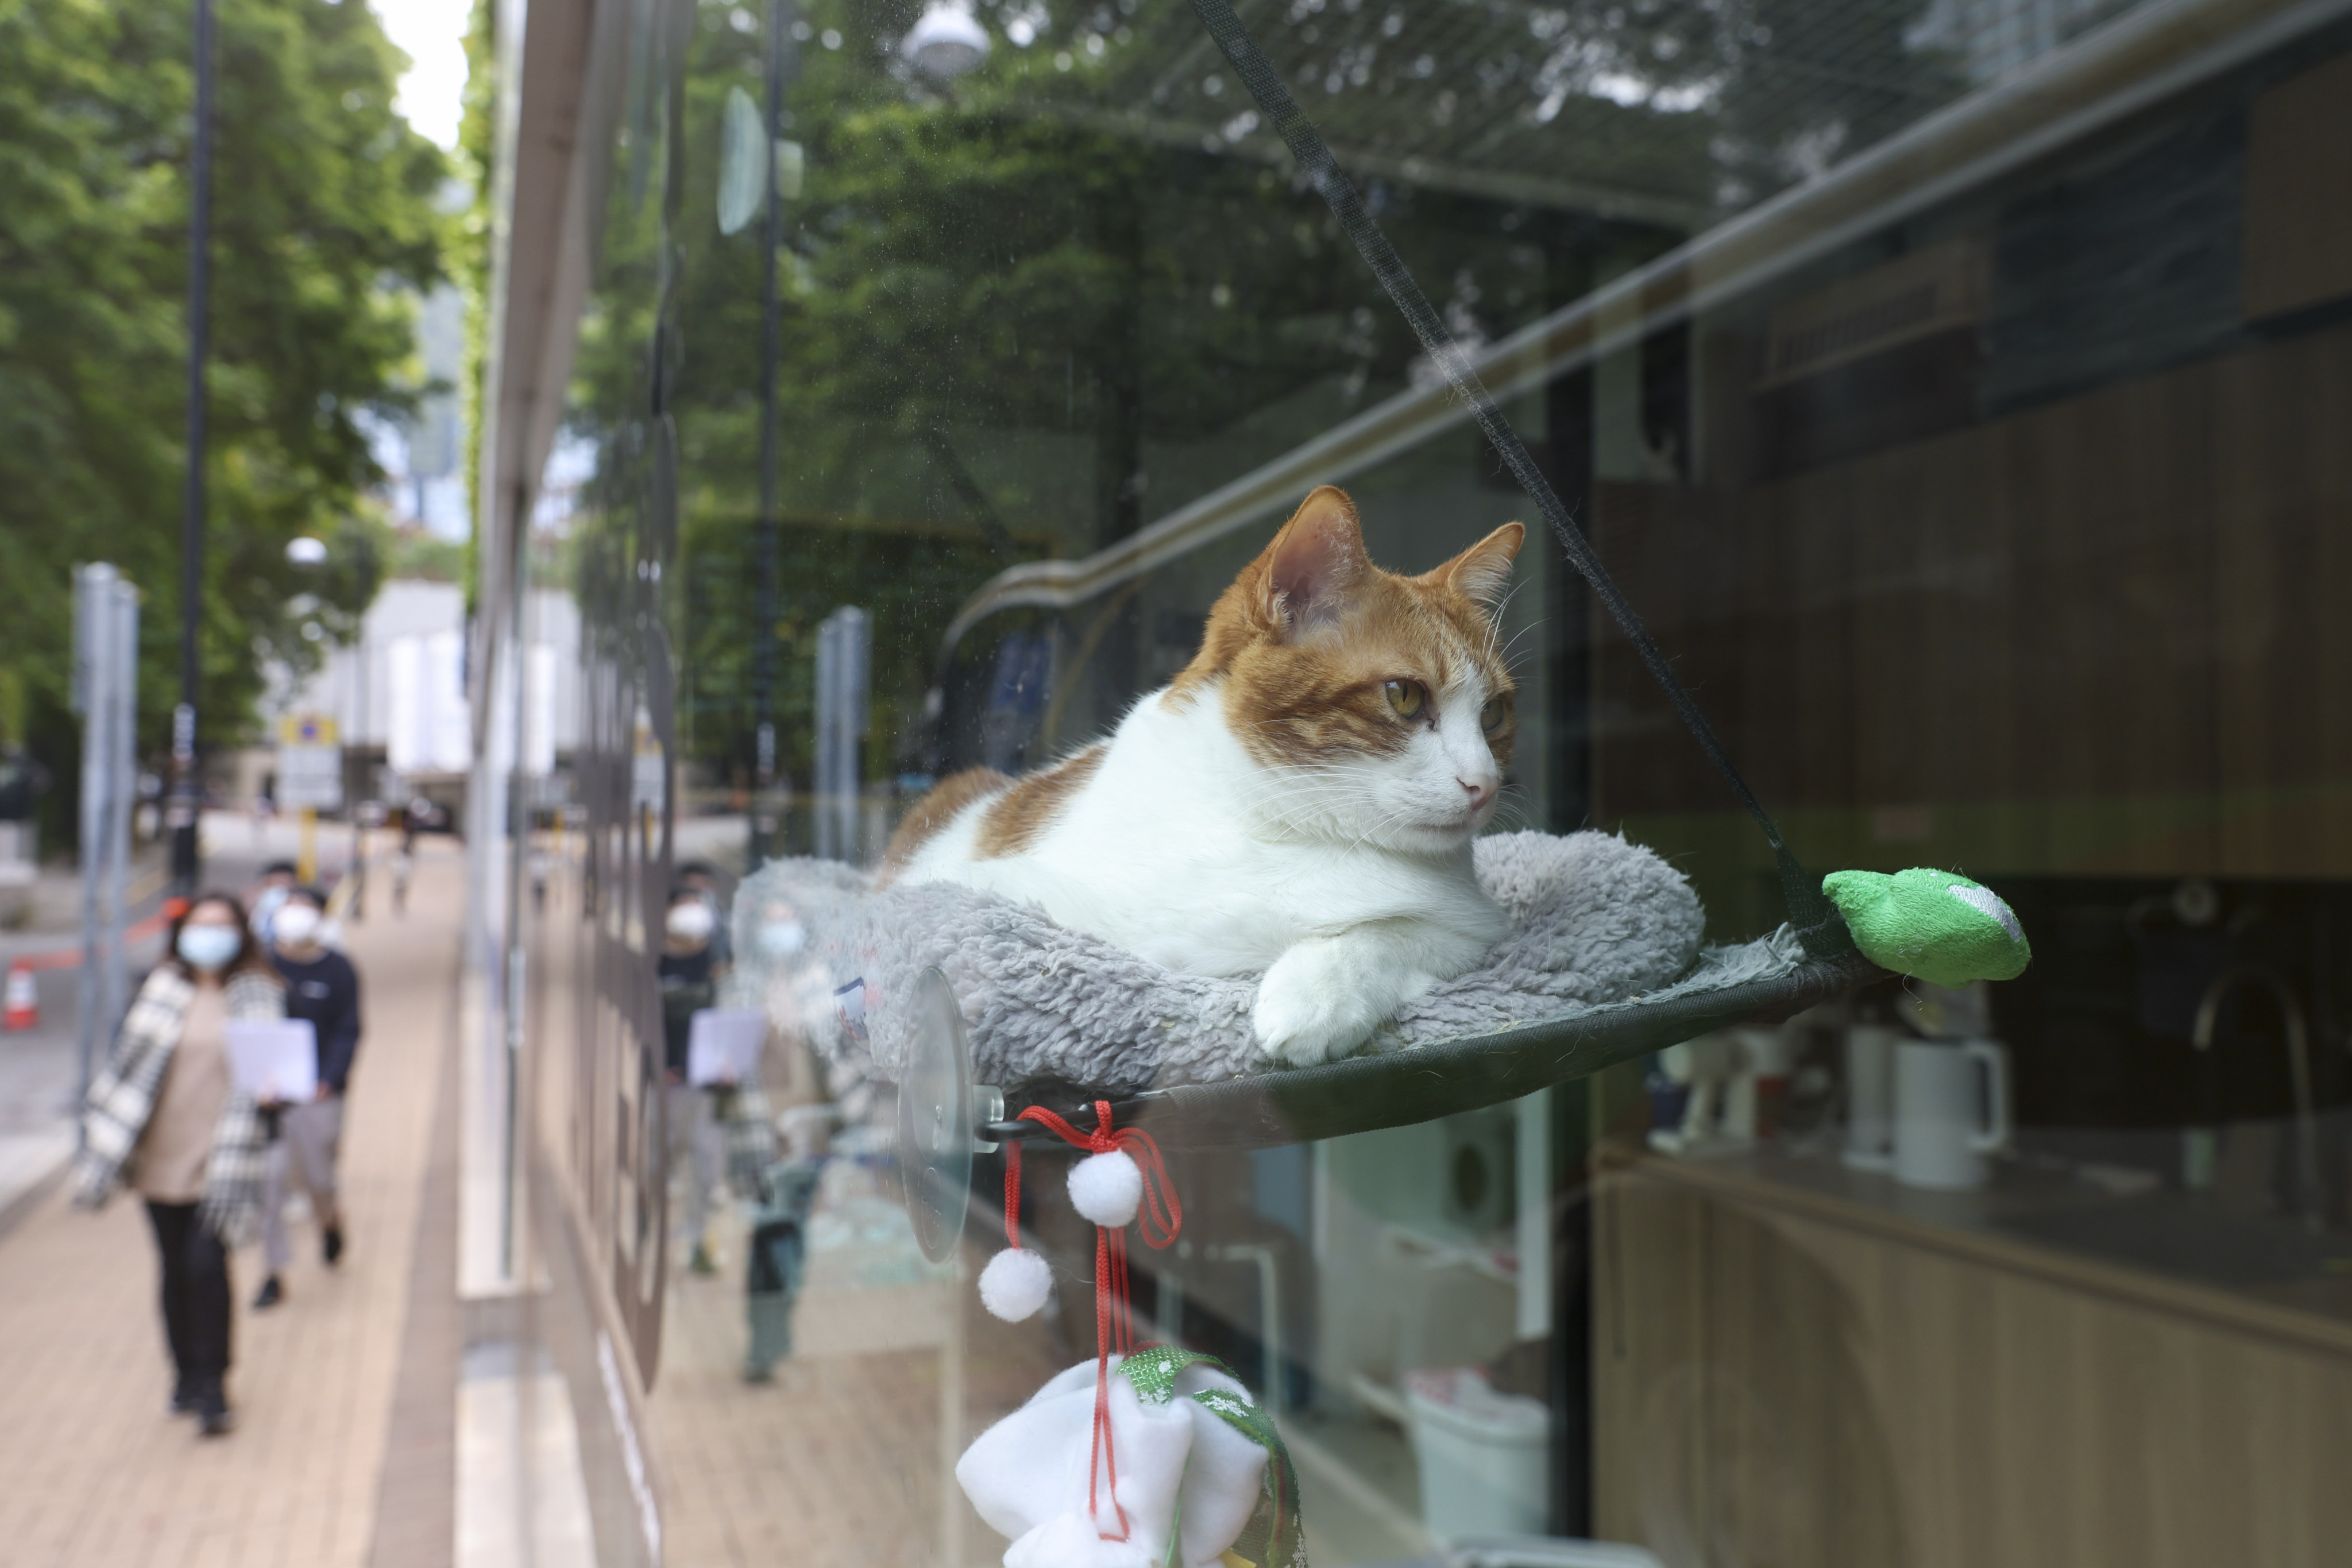 The Consumer Council has received 16 complaints related to pet insurance since 2021. Photo: Yik Yeung-man